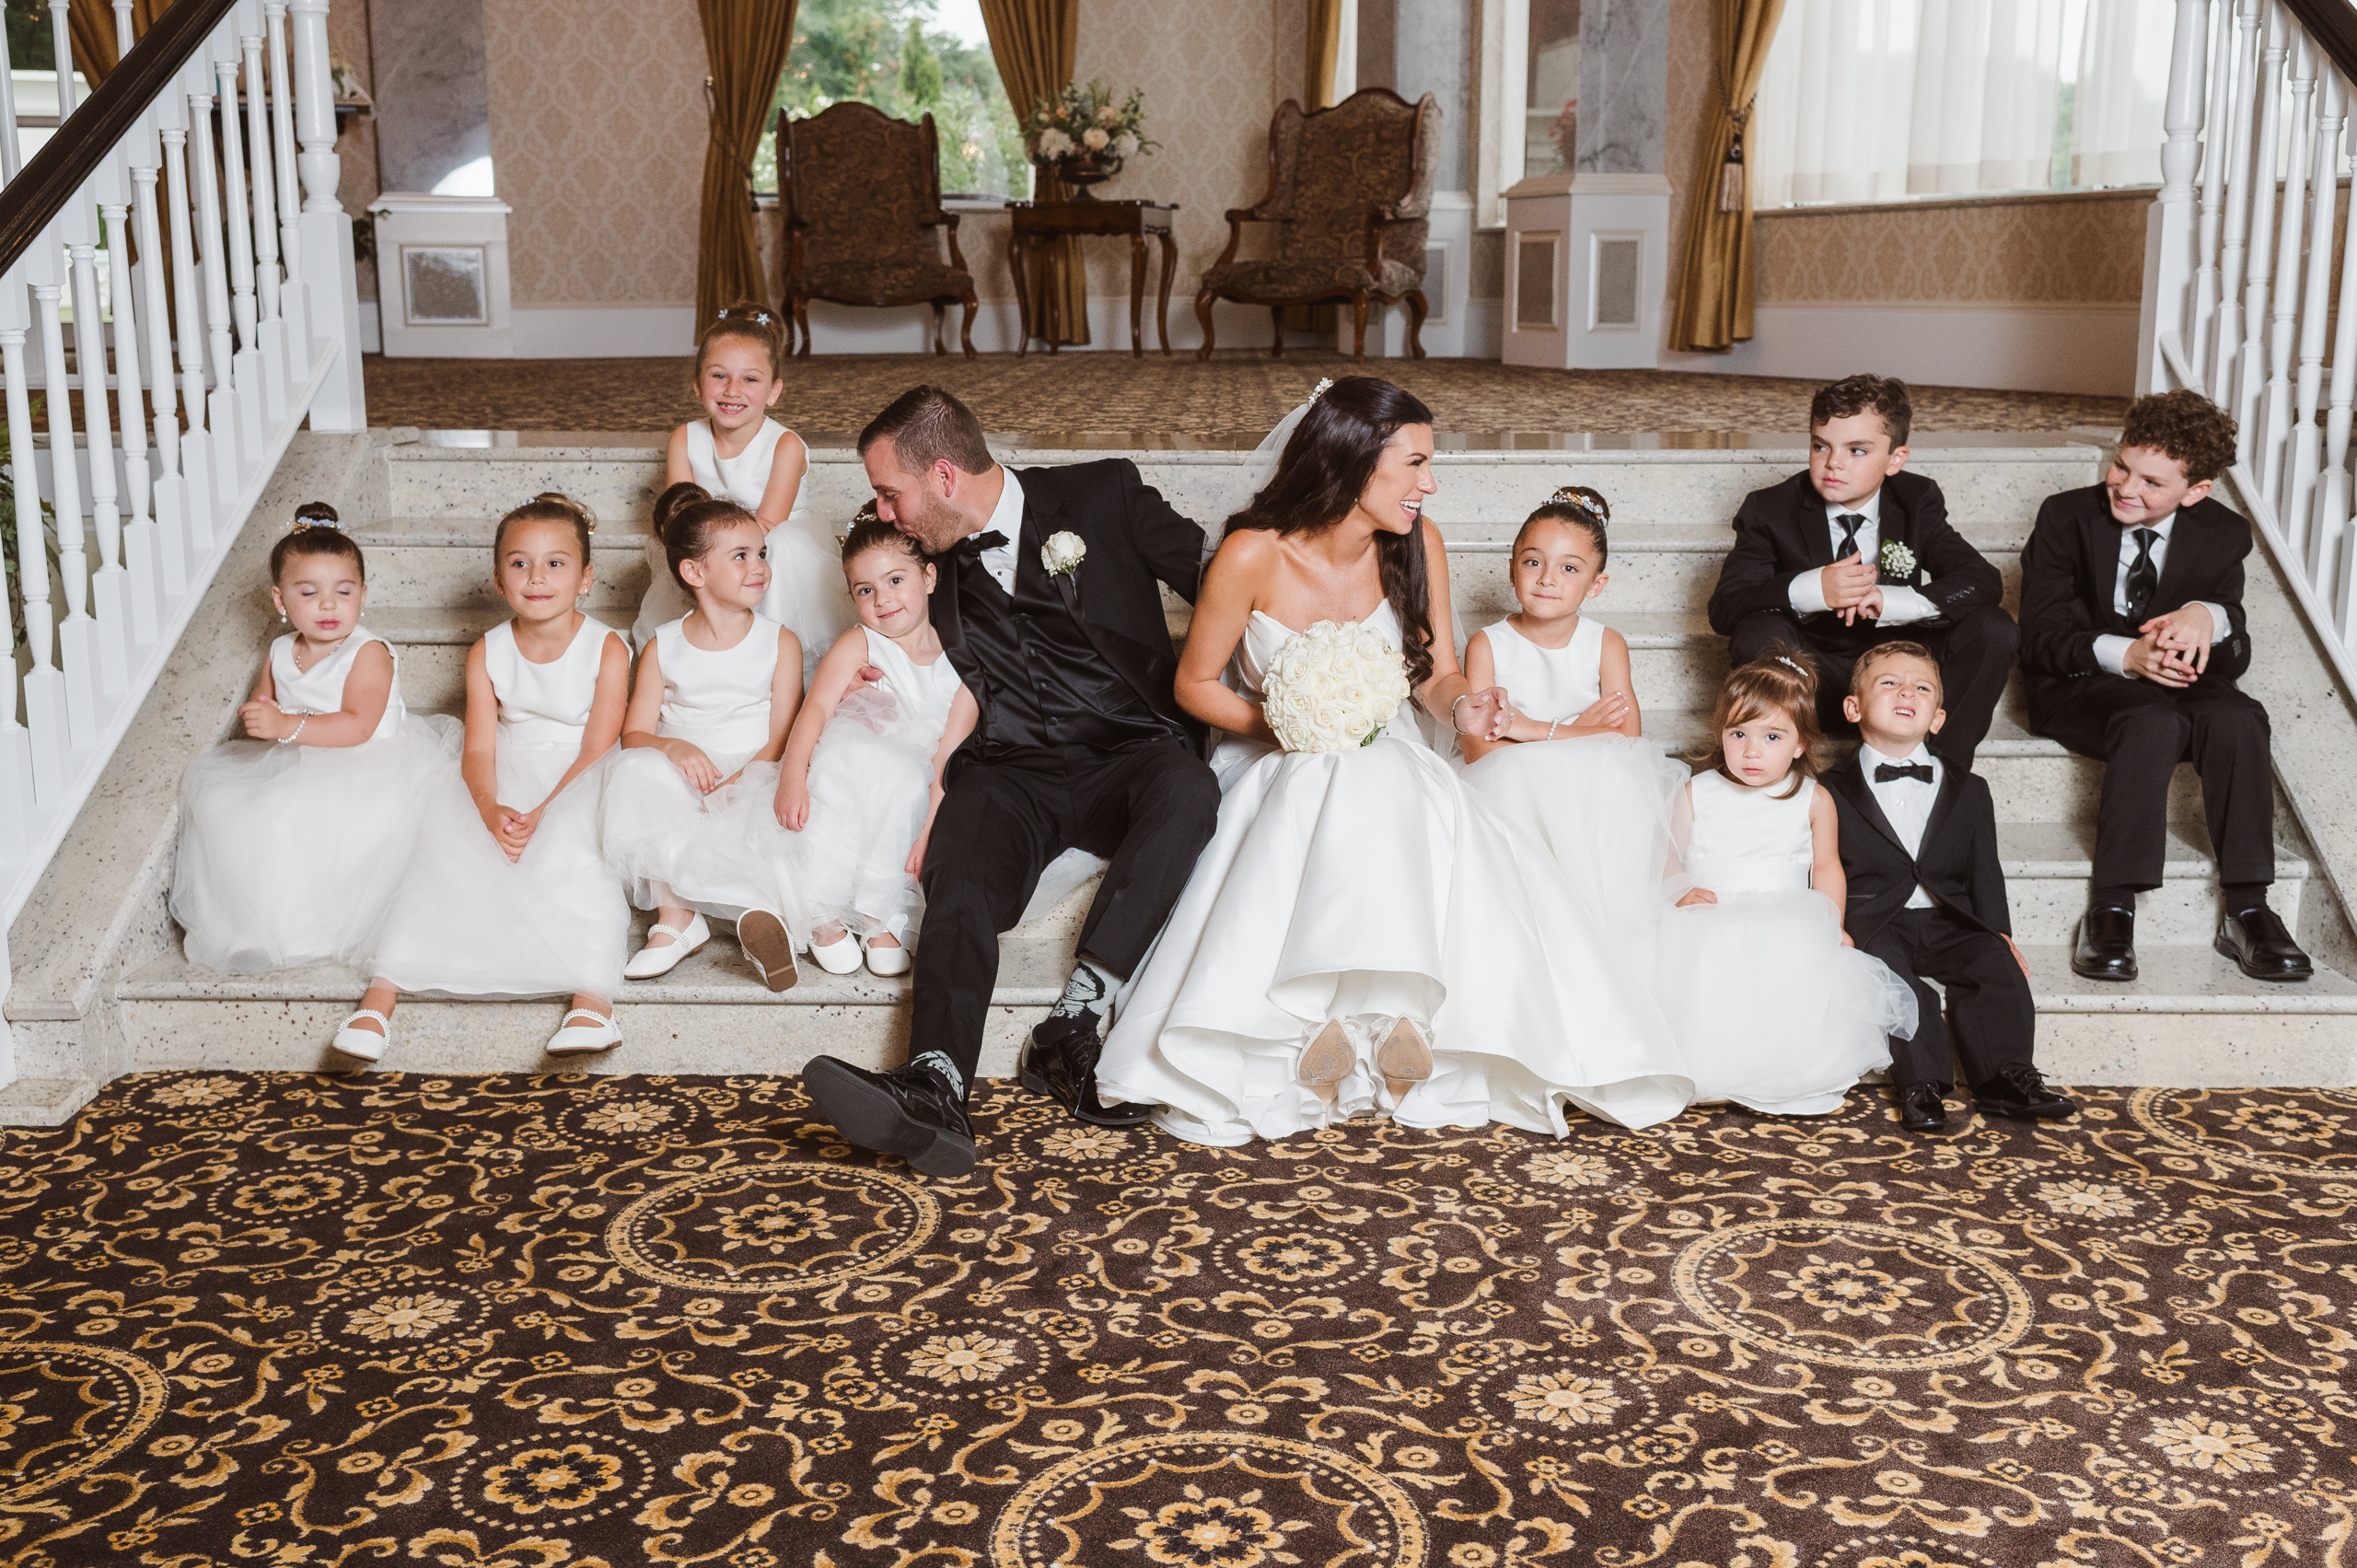 kids-at-a-wedding-photos-by-nj-photographer-suess-moments